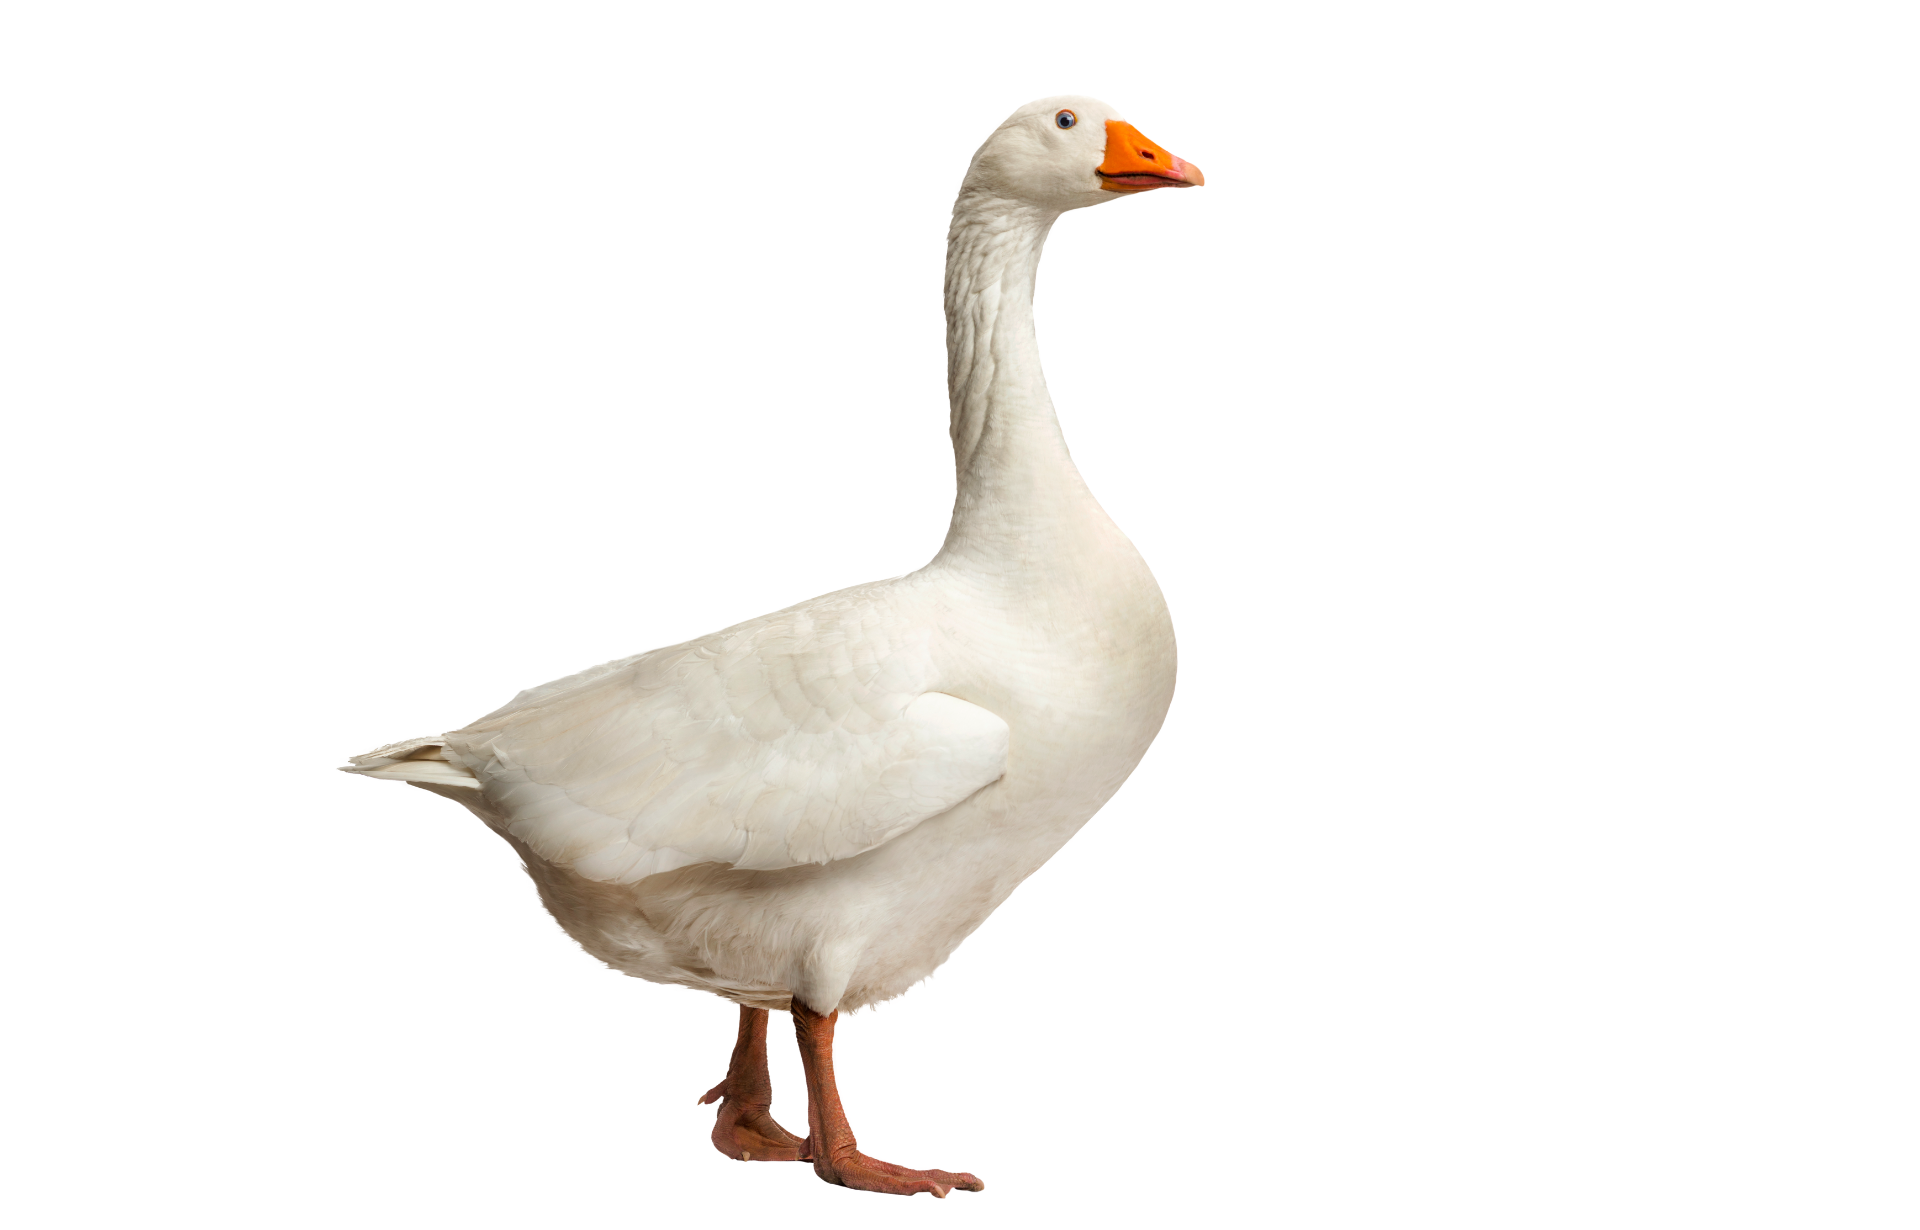 a white goose with an orange beak is standing on a white background .